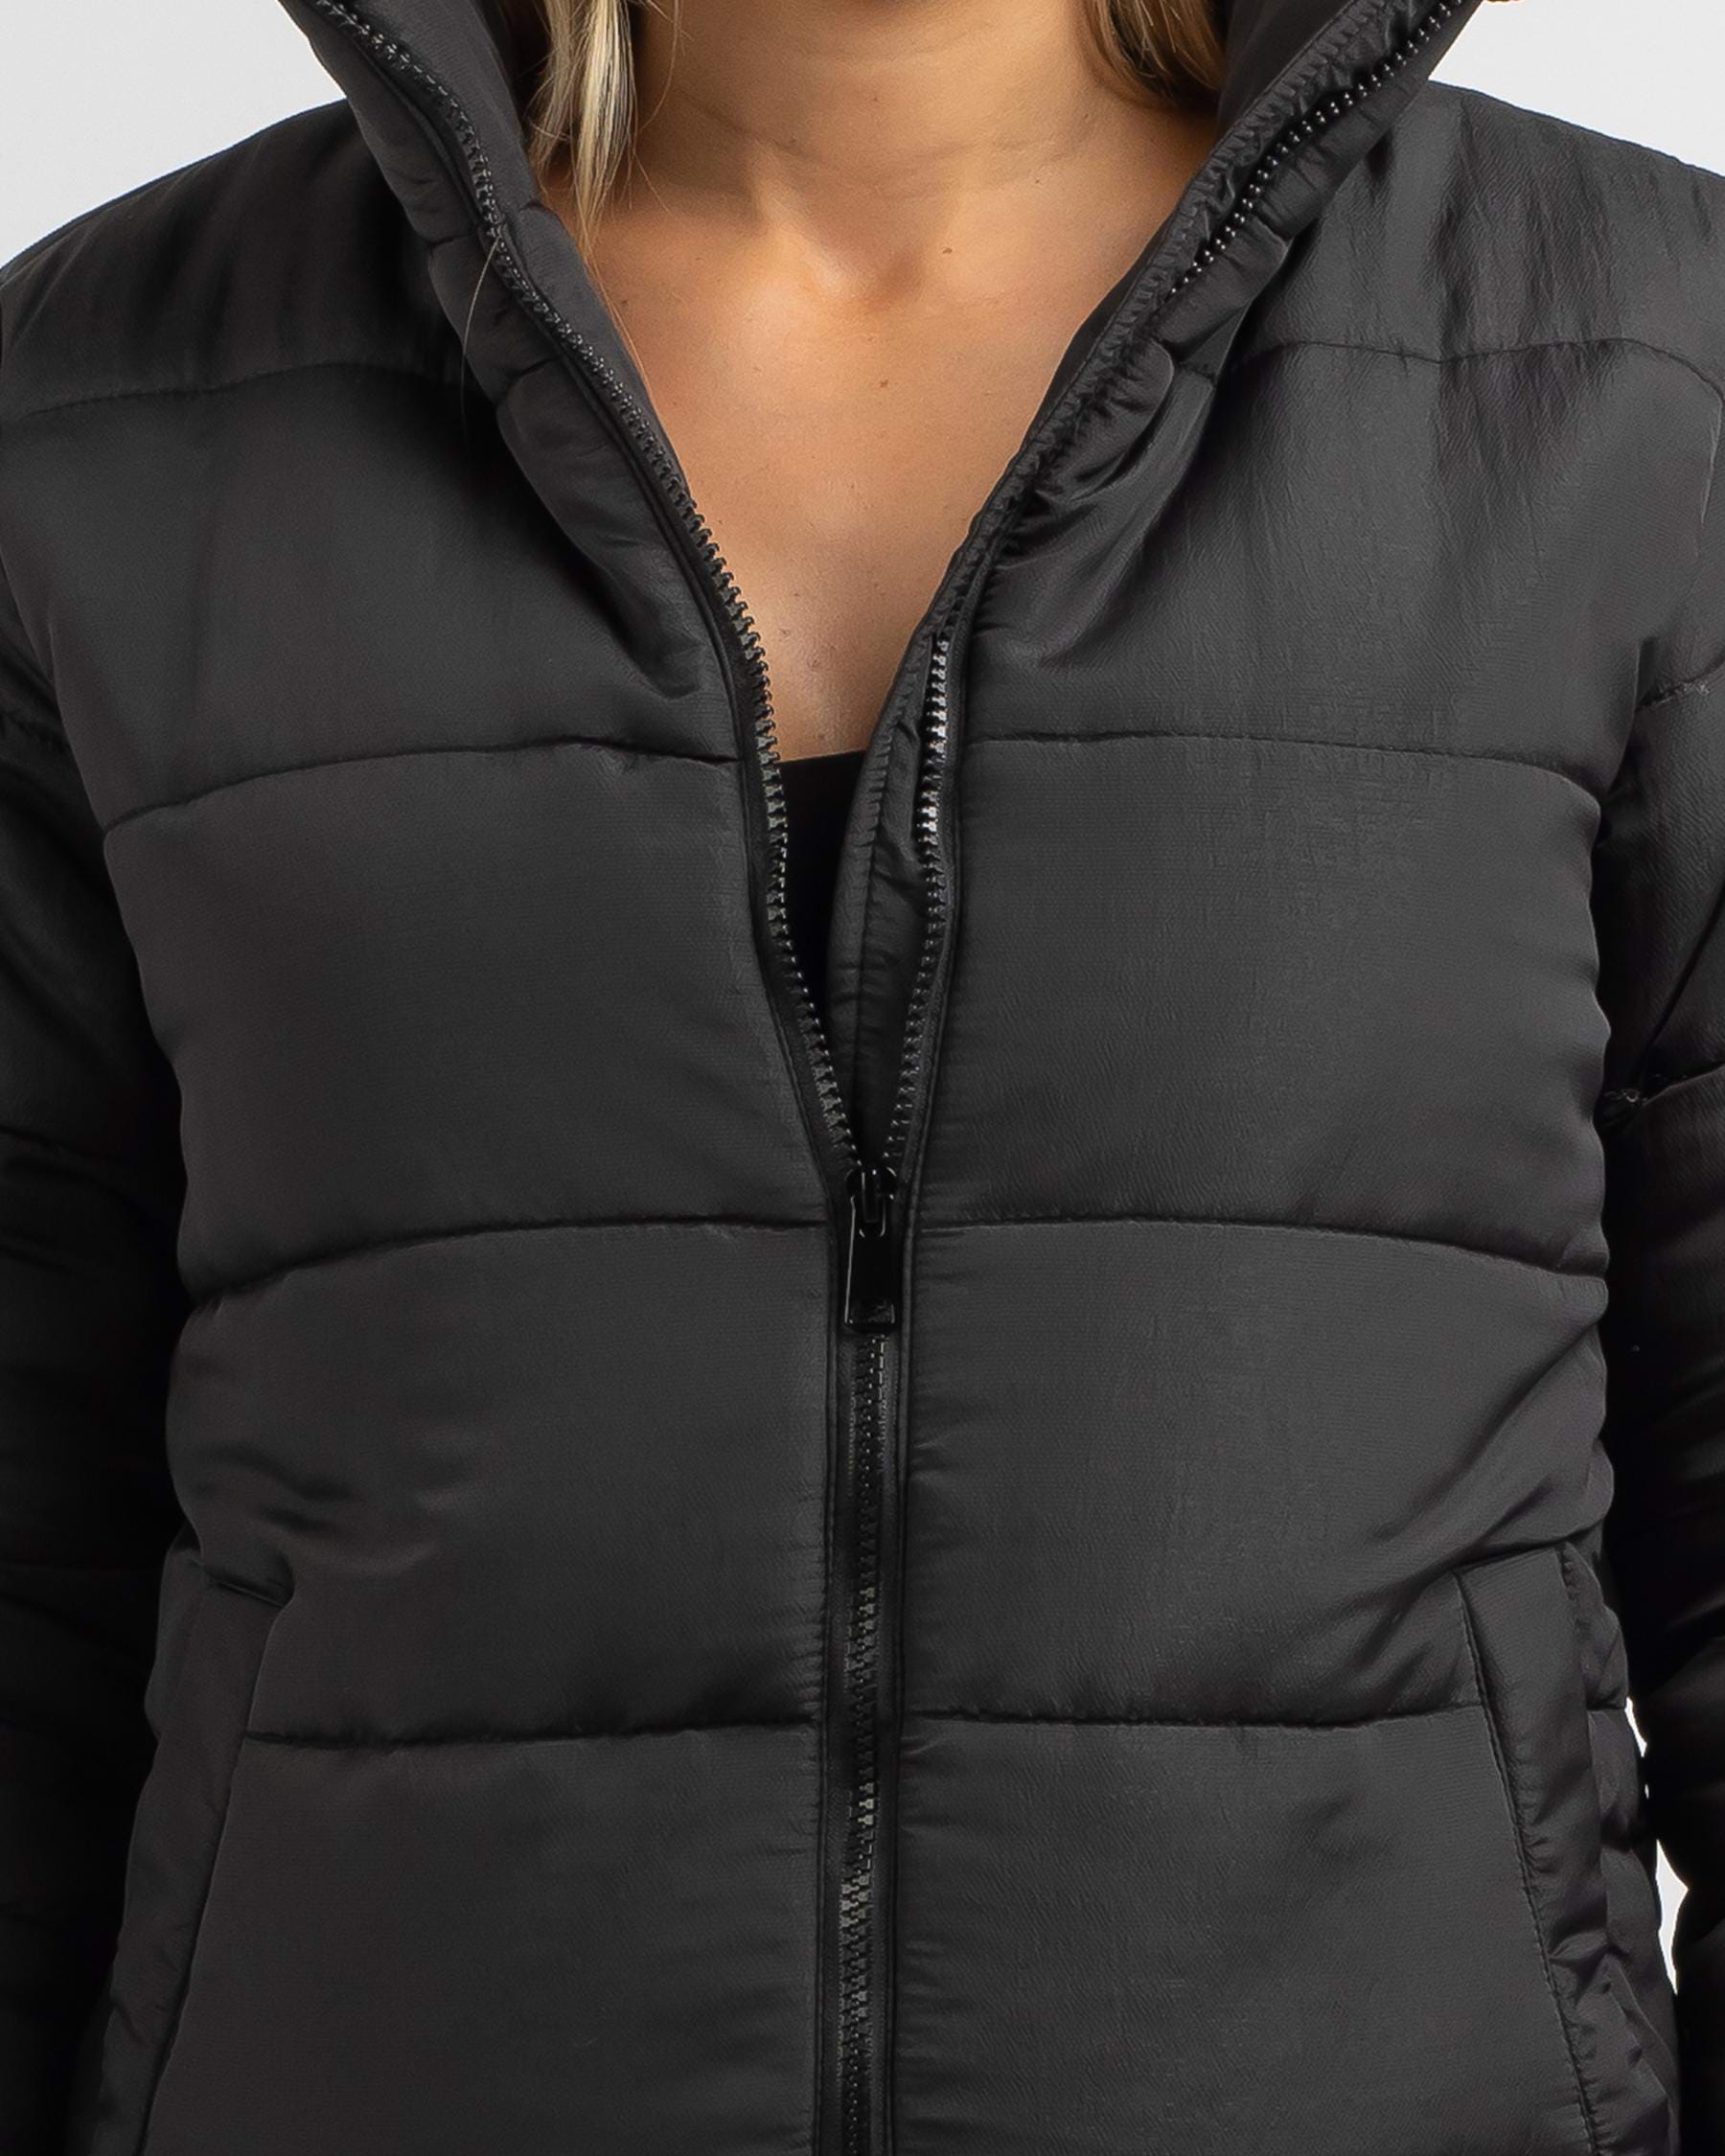 Shop Ava And Ever Jezebel Puffer Jacket In Black - Fast Shipping & Easy ...